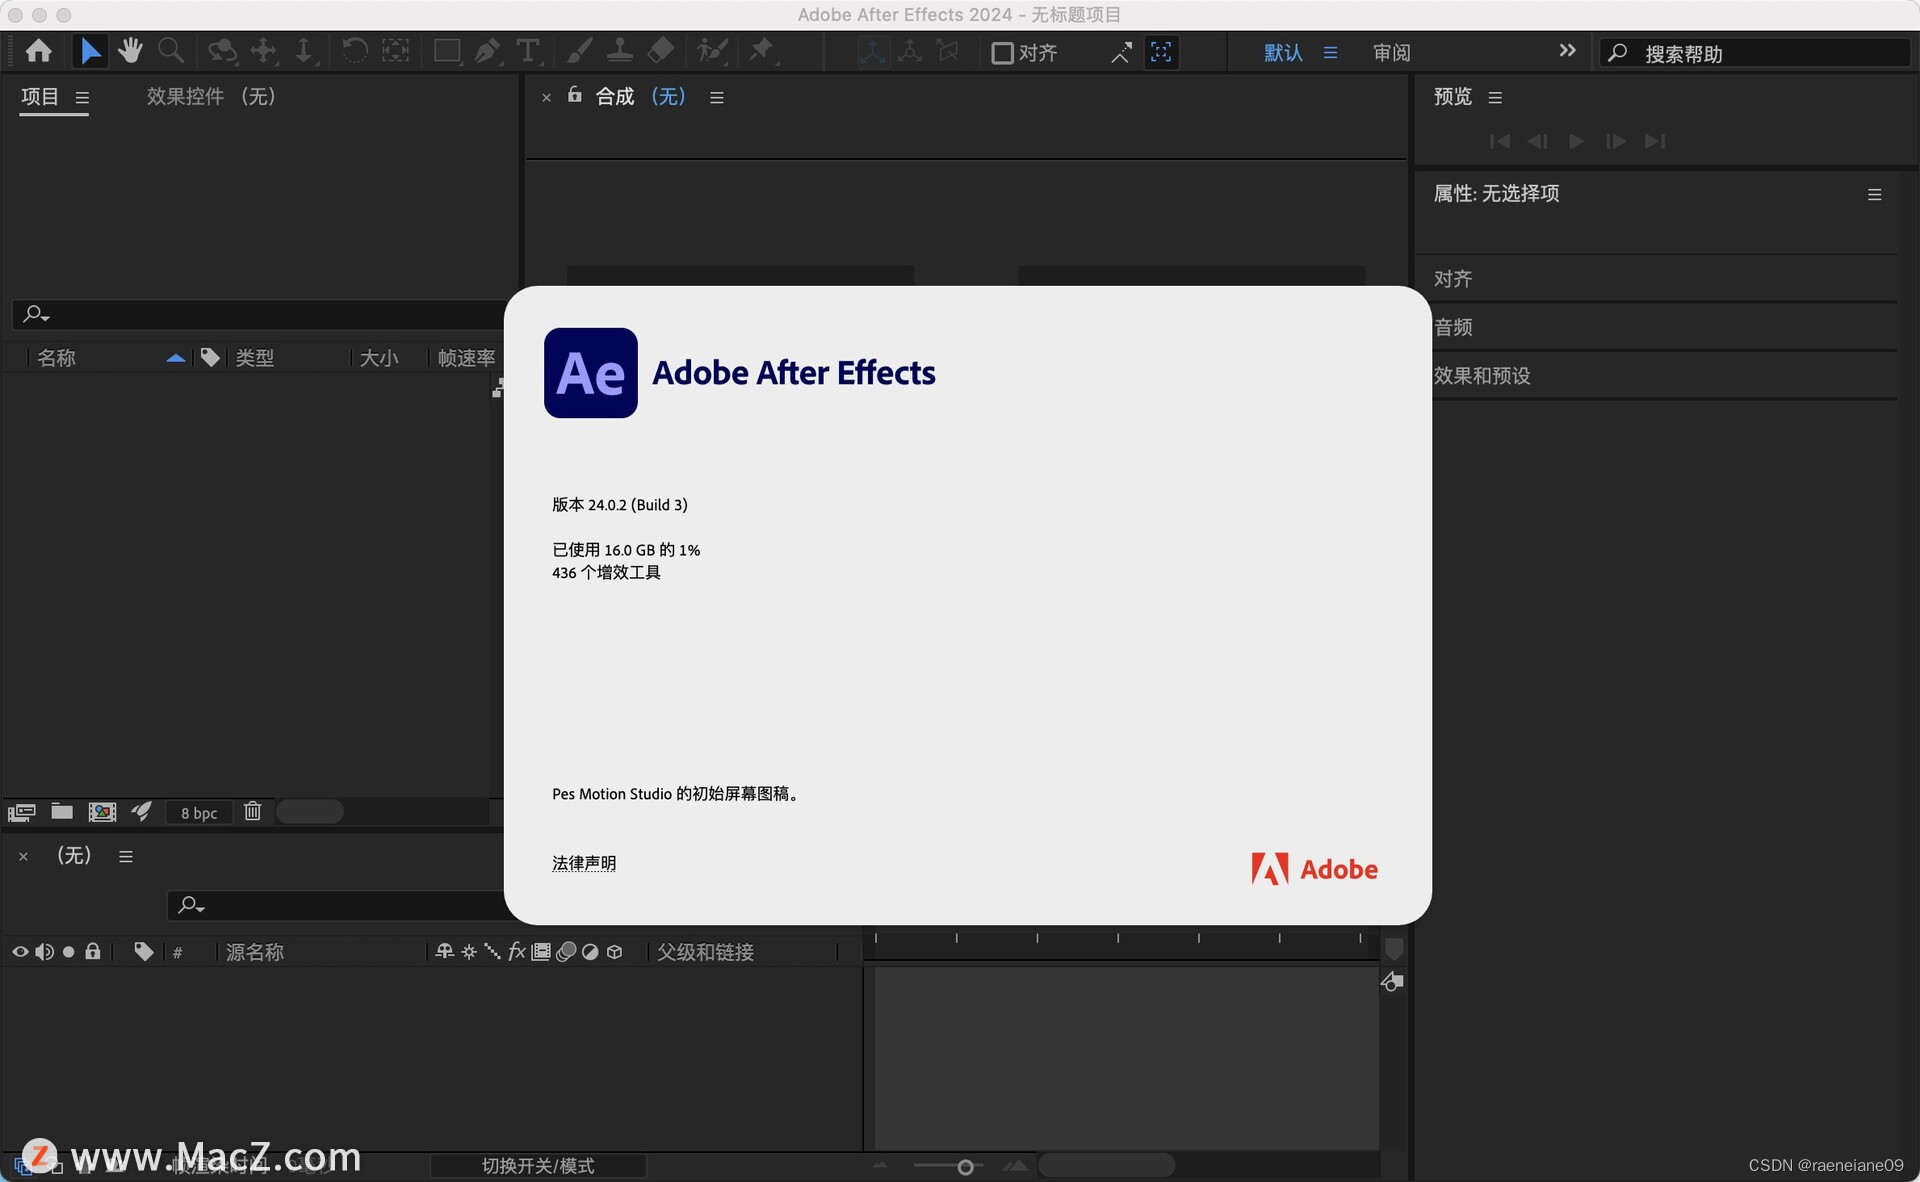 Adobe After Effects 2024 v24.0.0.55 for mac instal free